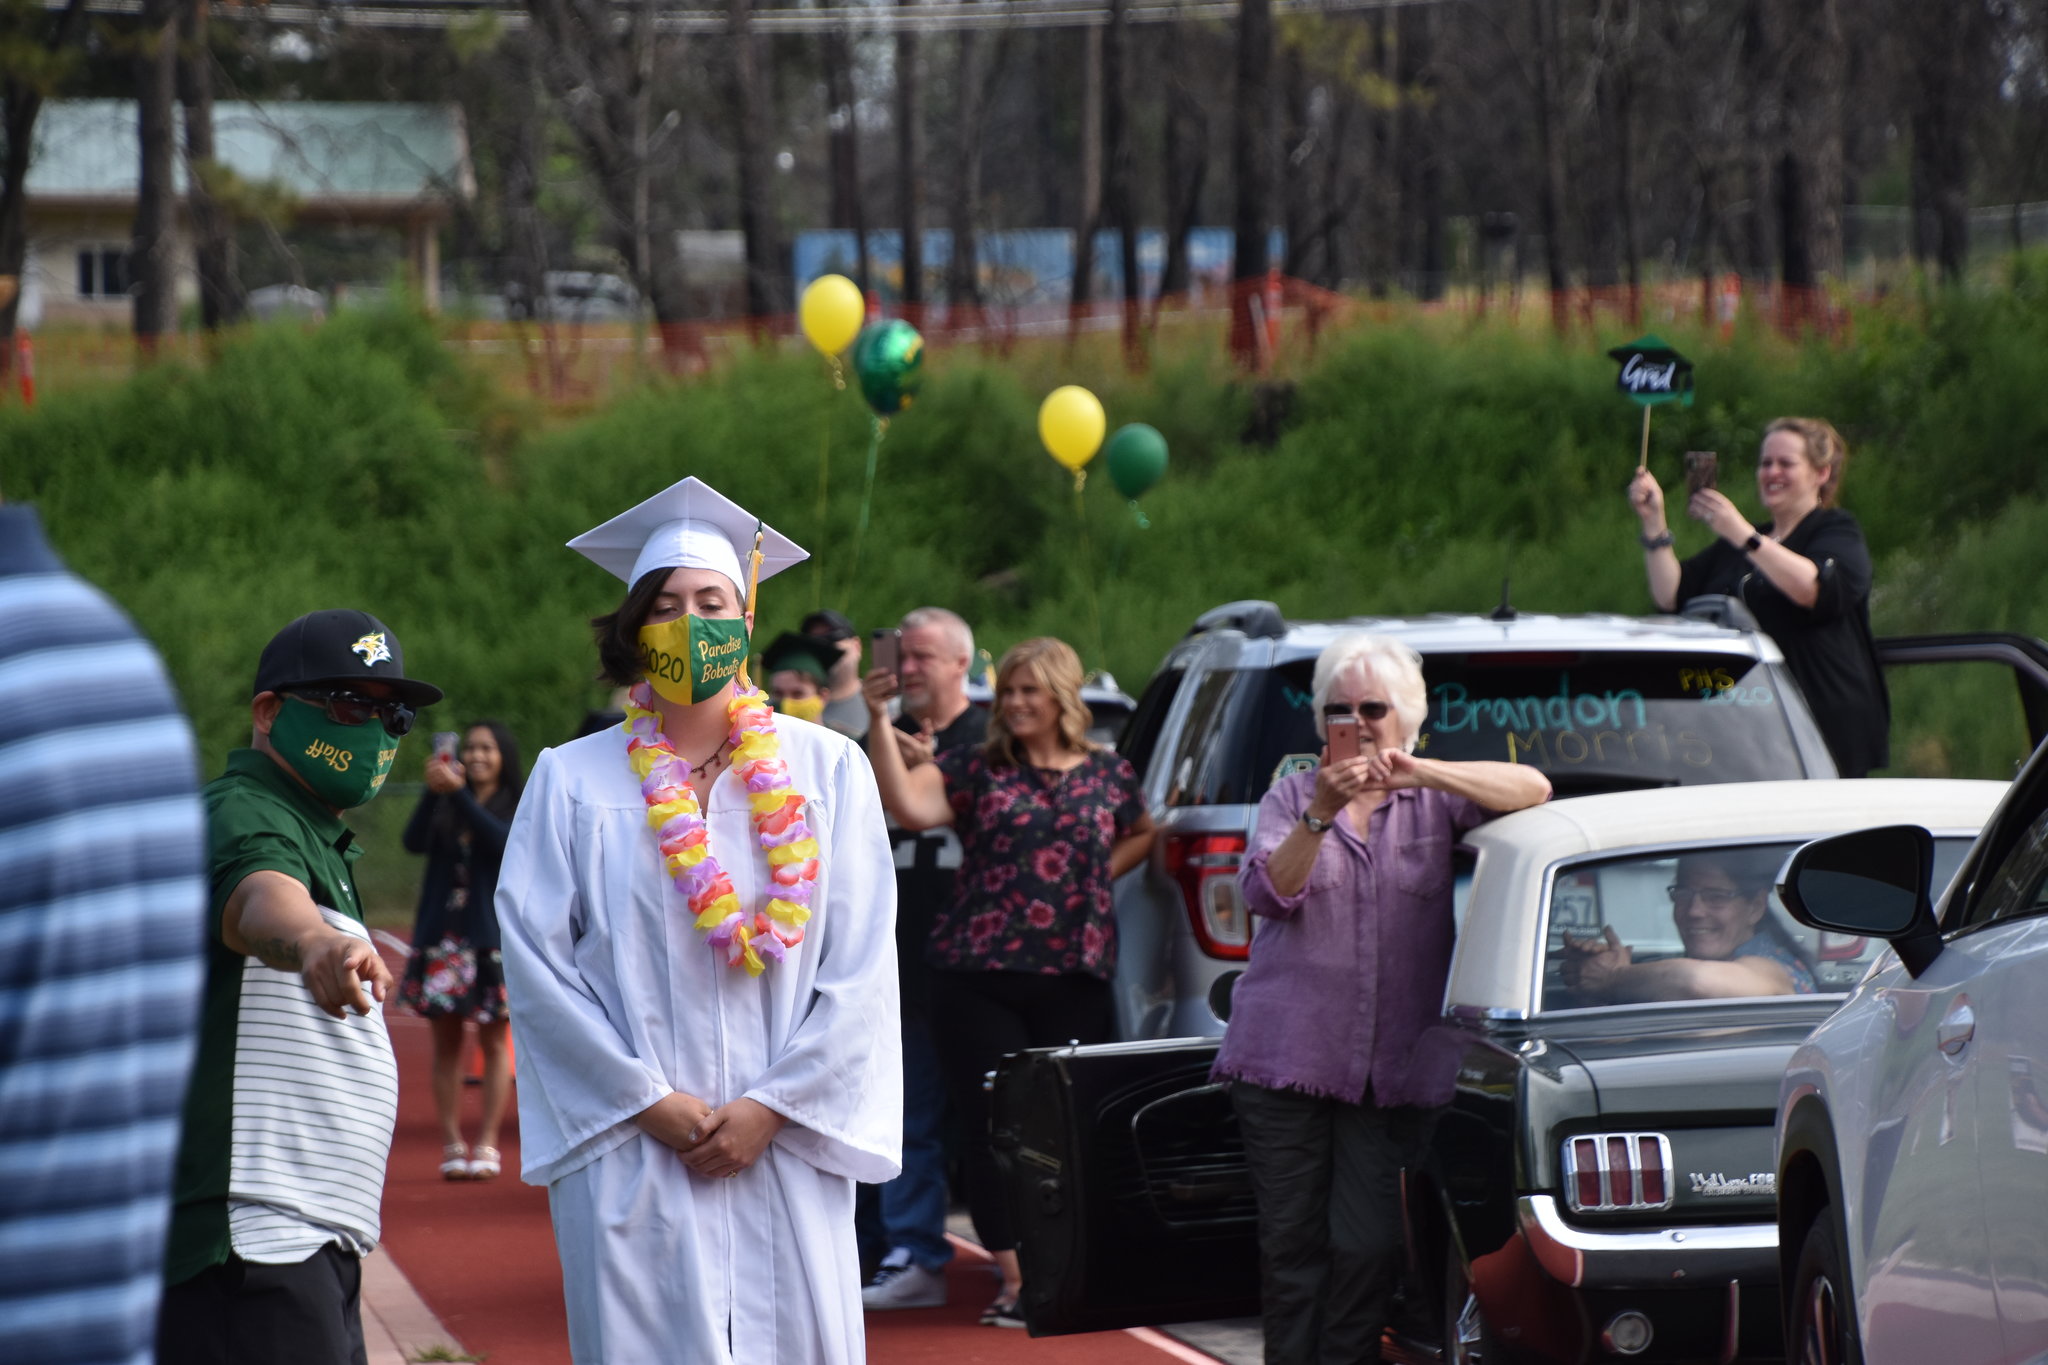 A graduate in a white cap and gown adorned with a pink lei stands on a track. People, some wearing masks, celebrate nearby. Cars are parked along the track, with onlookers cheering, holding balloons and signs. One sign reads 